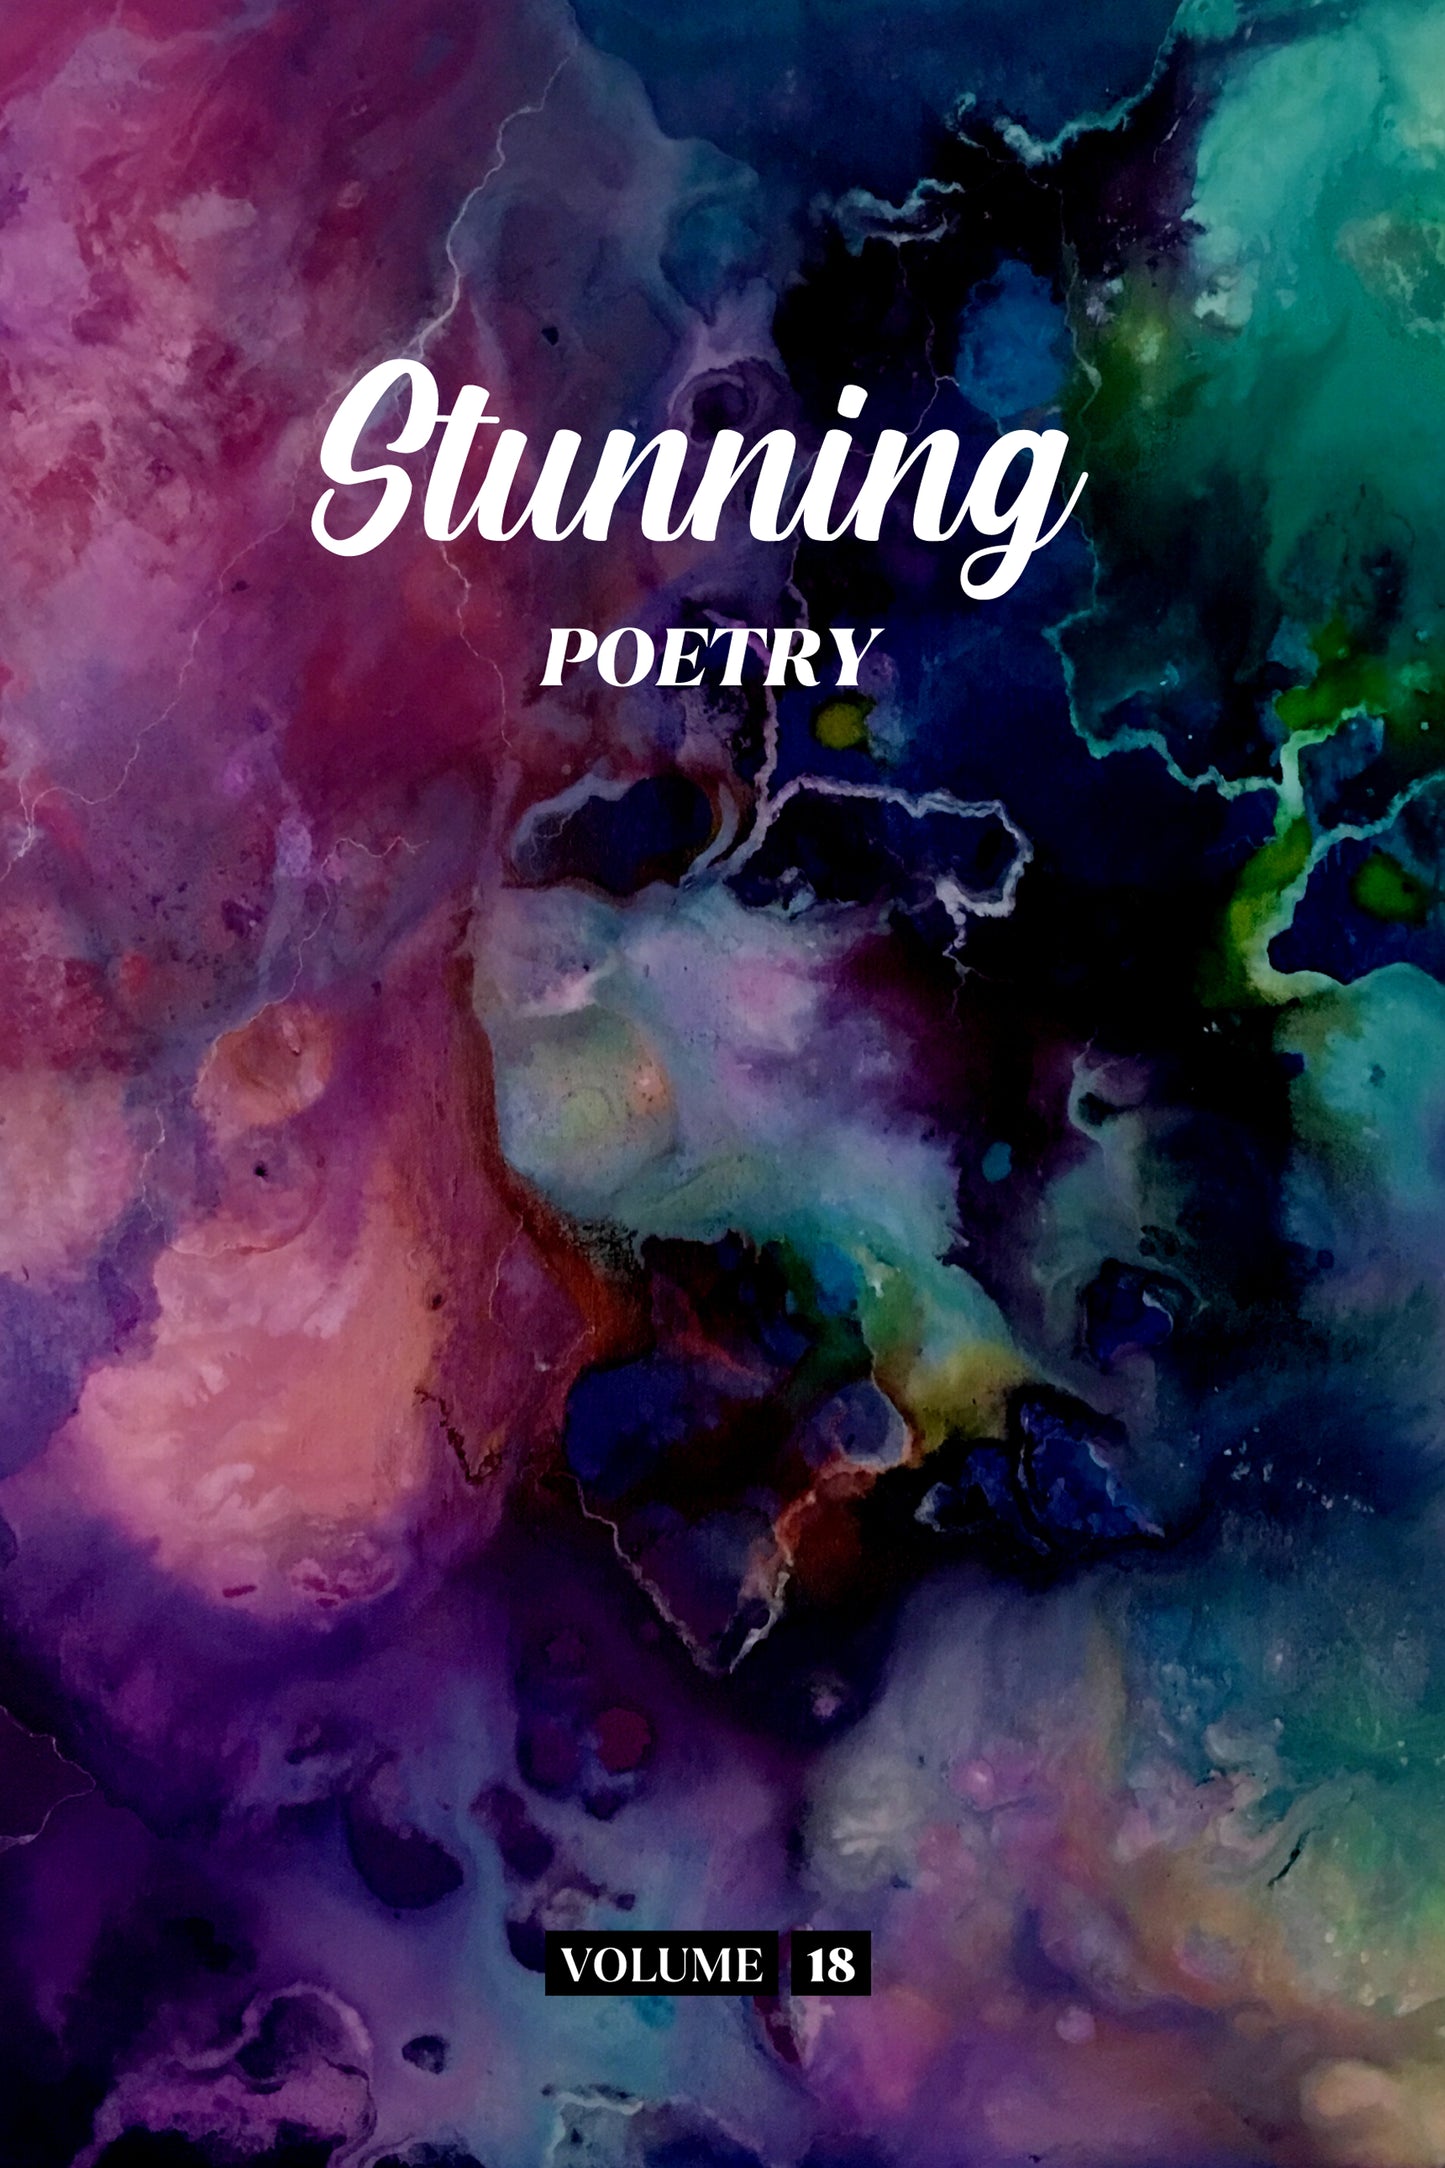 Stunning Poetry (Volume 18) - Physical Book